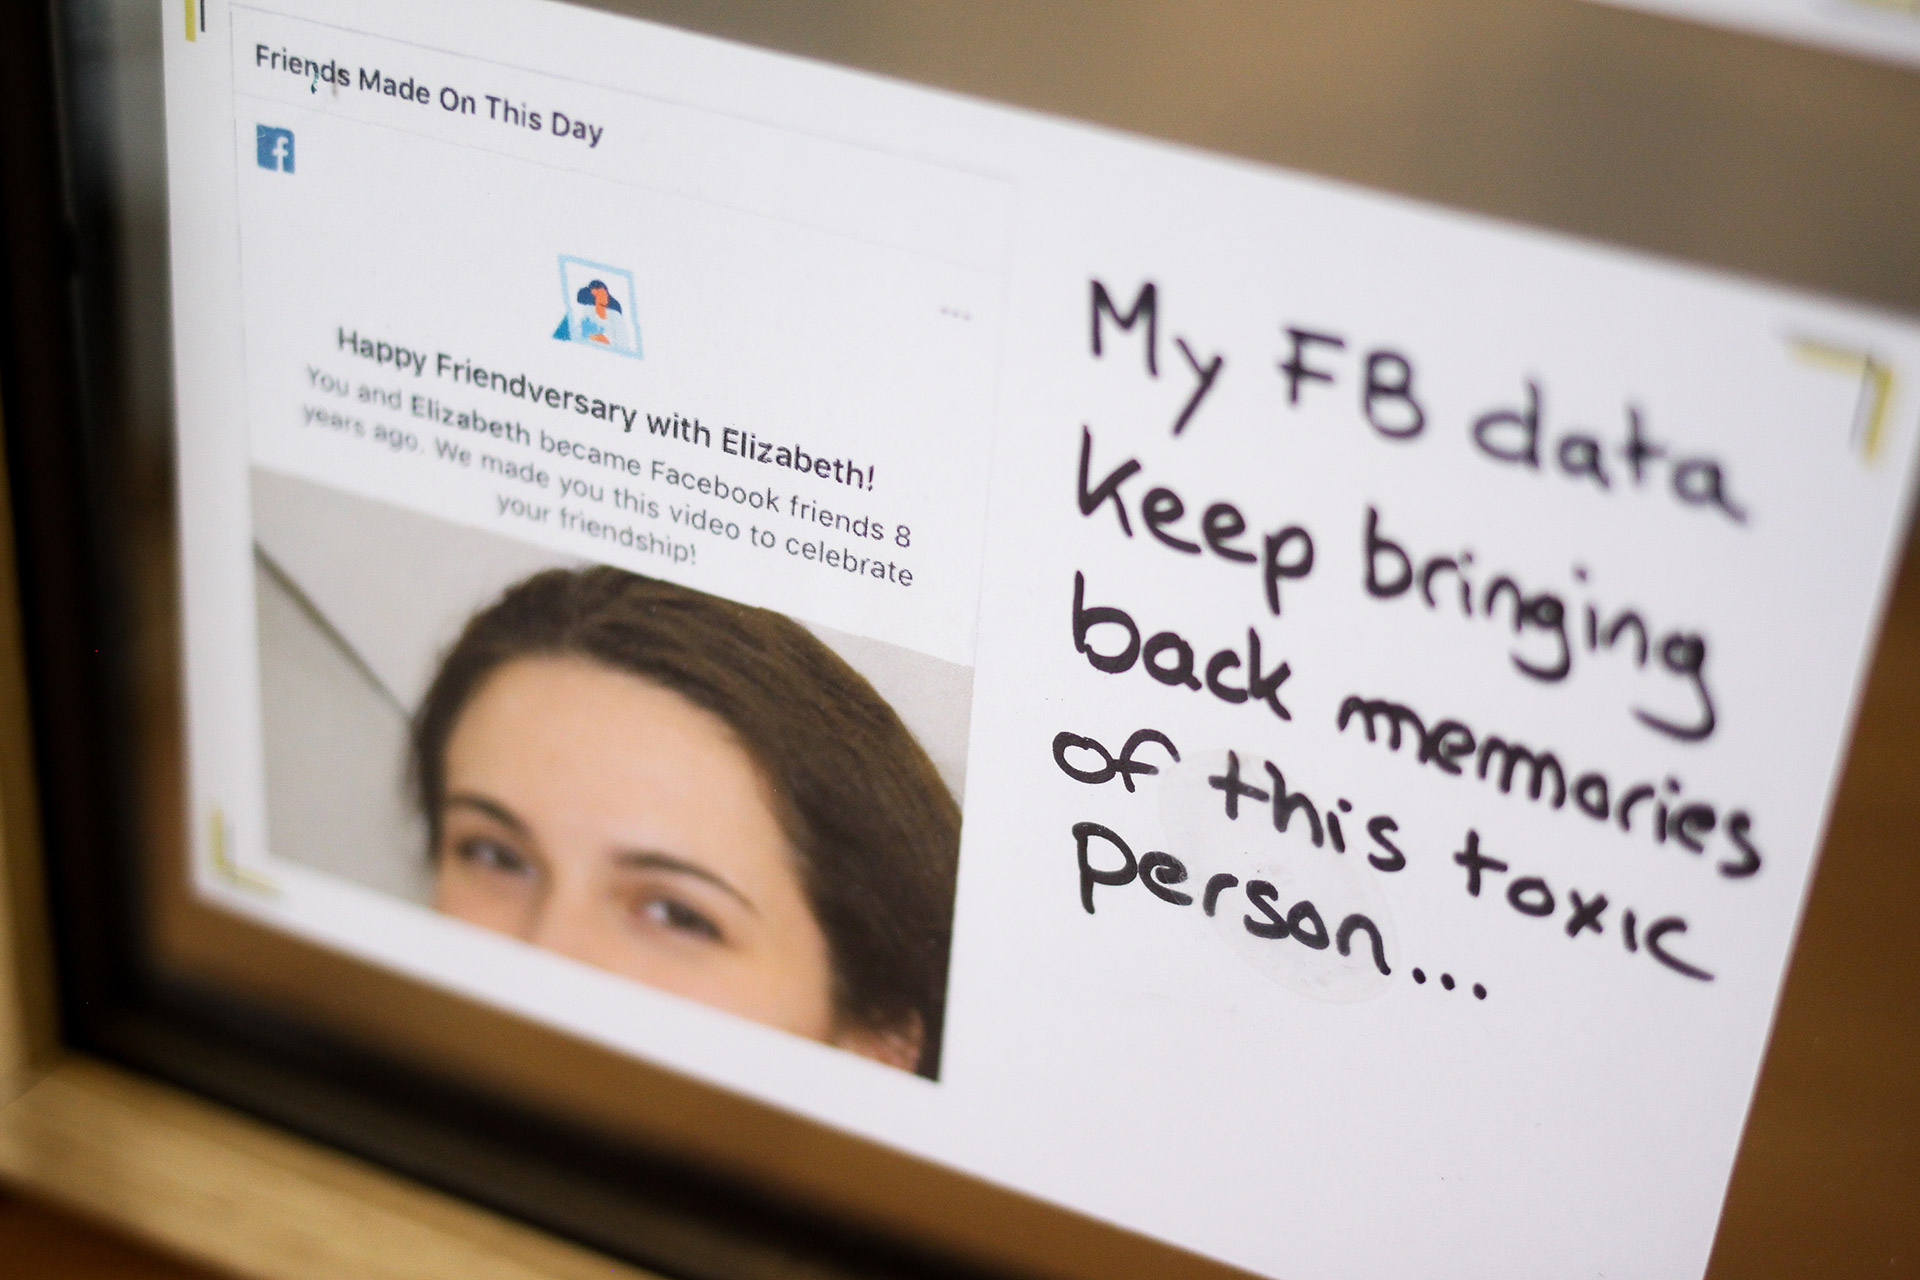 Another close-up on a card of the anti-memorial ranting against Facebook profile and data bringing back memory of a toxic person